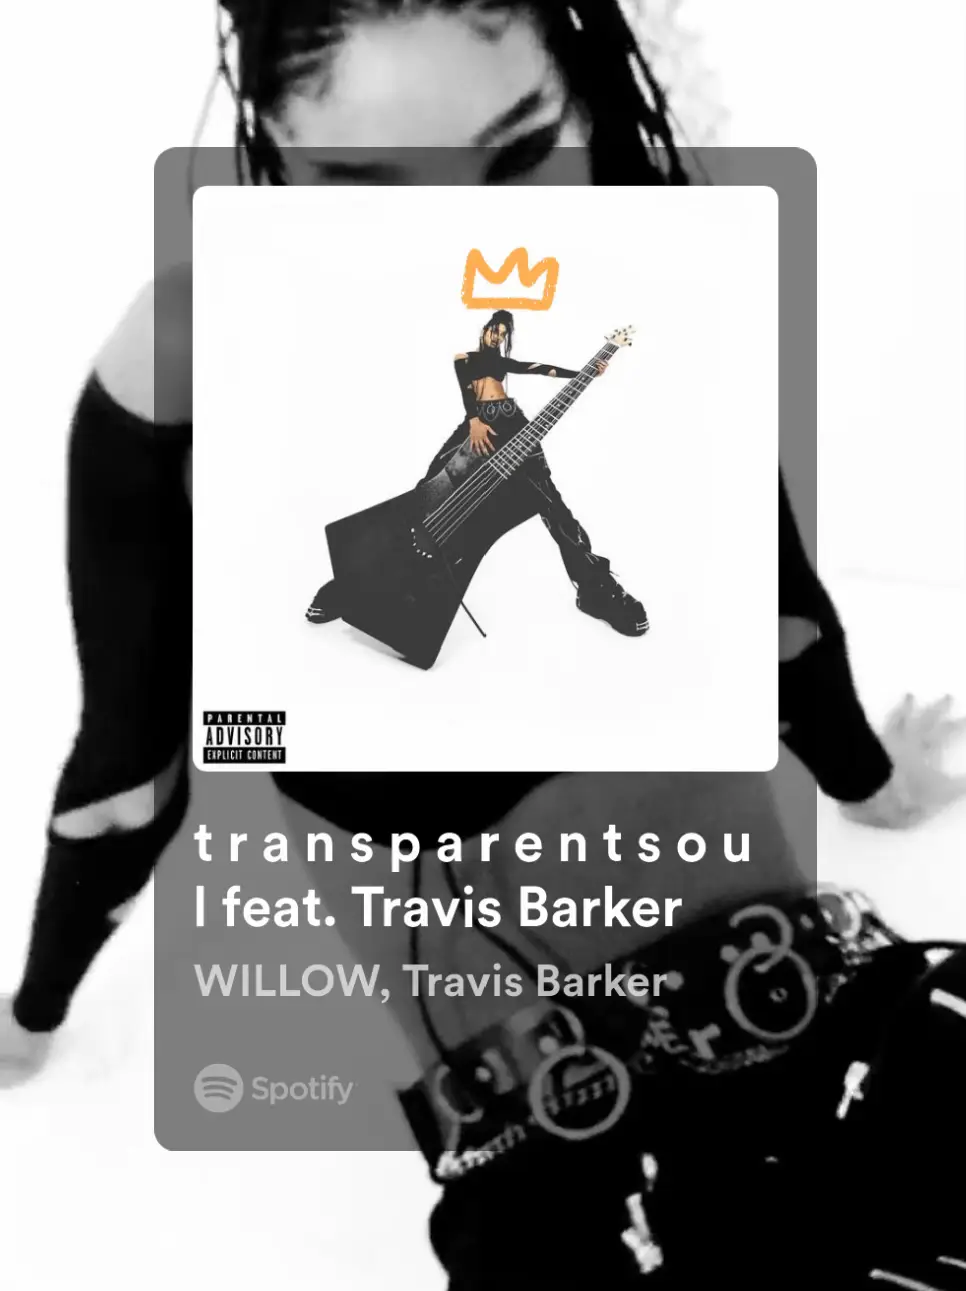  A Spotify ad for a song by Travis Barker.